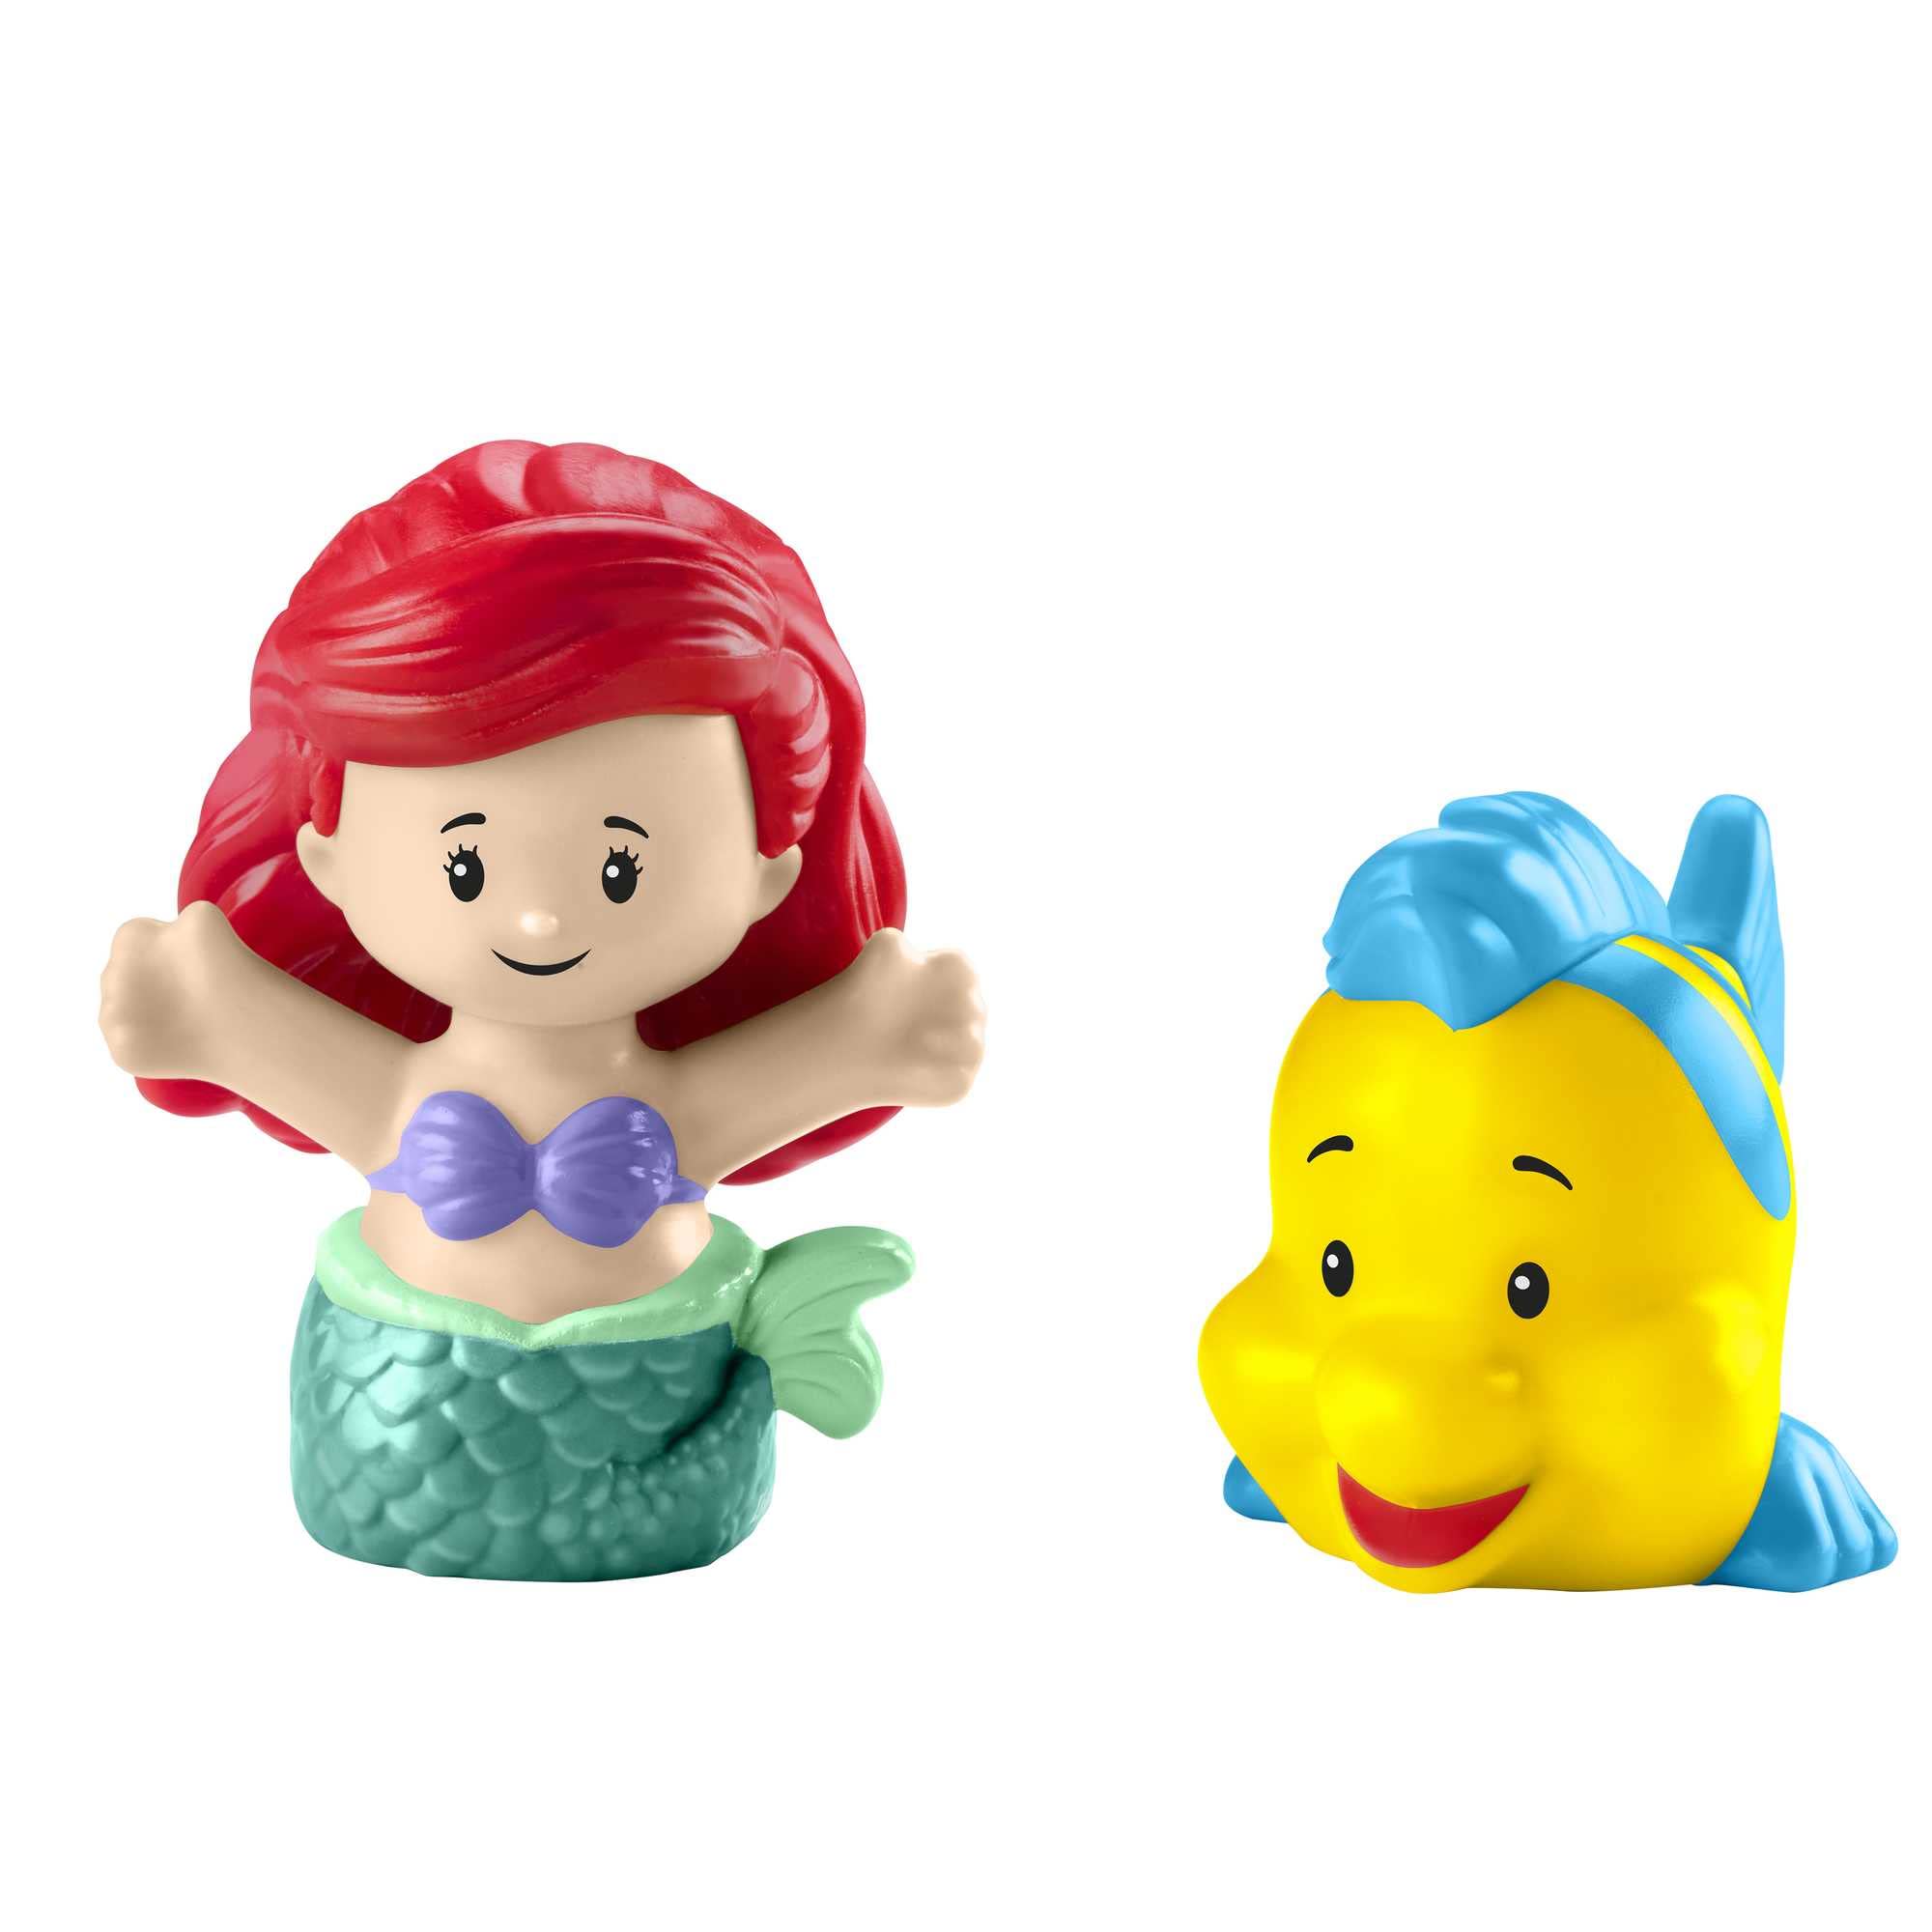 Fisher-Price Disney Princess Toddler Toy Light-Up Sea Carriage Musical Vehicle with Ariel & Flounder Figures for Ages 18+ Months